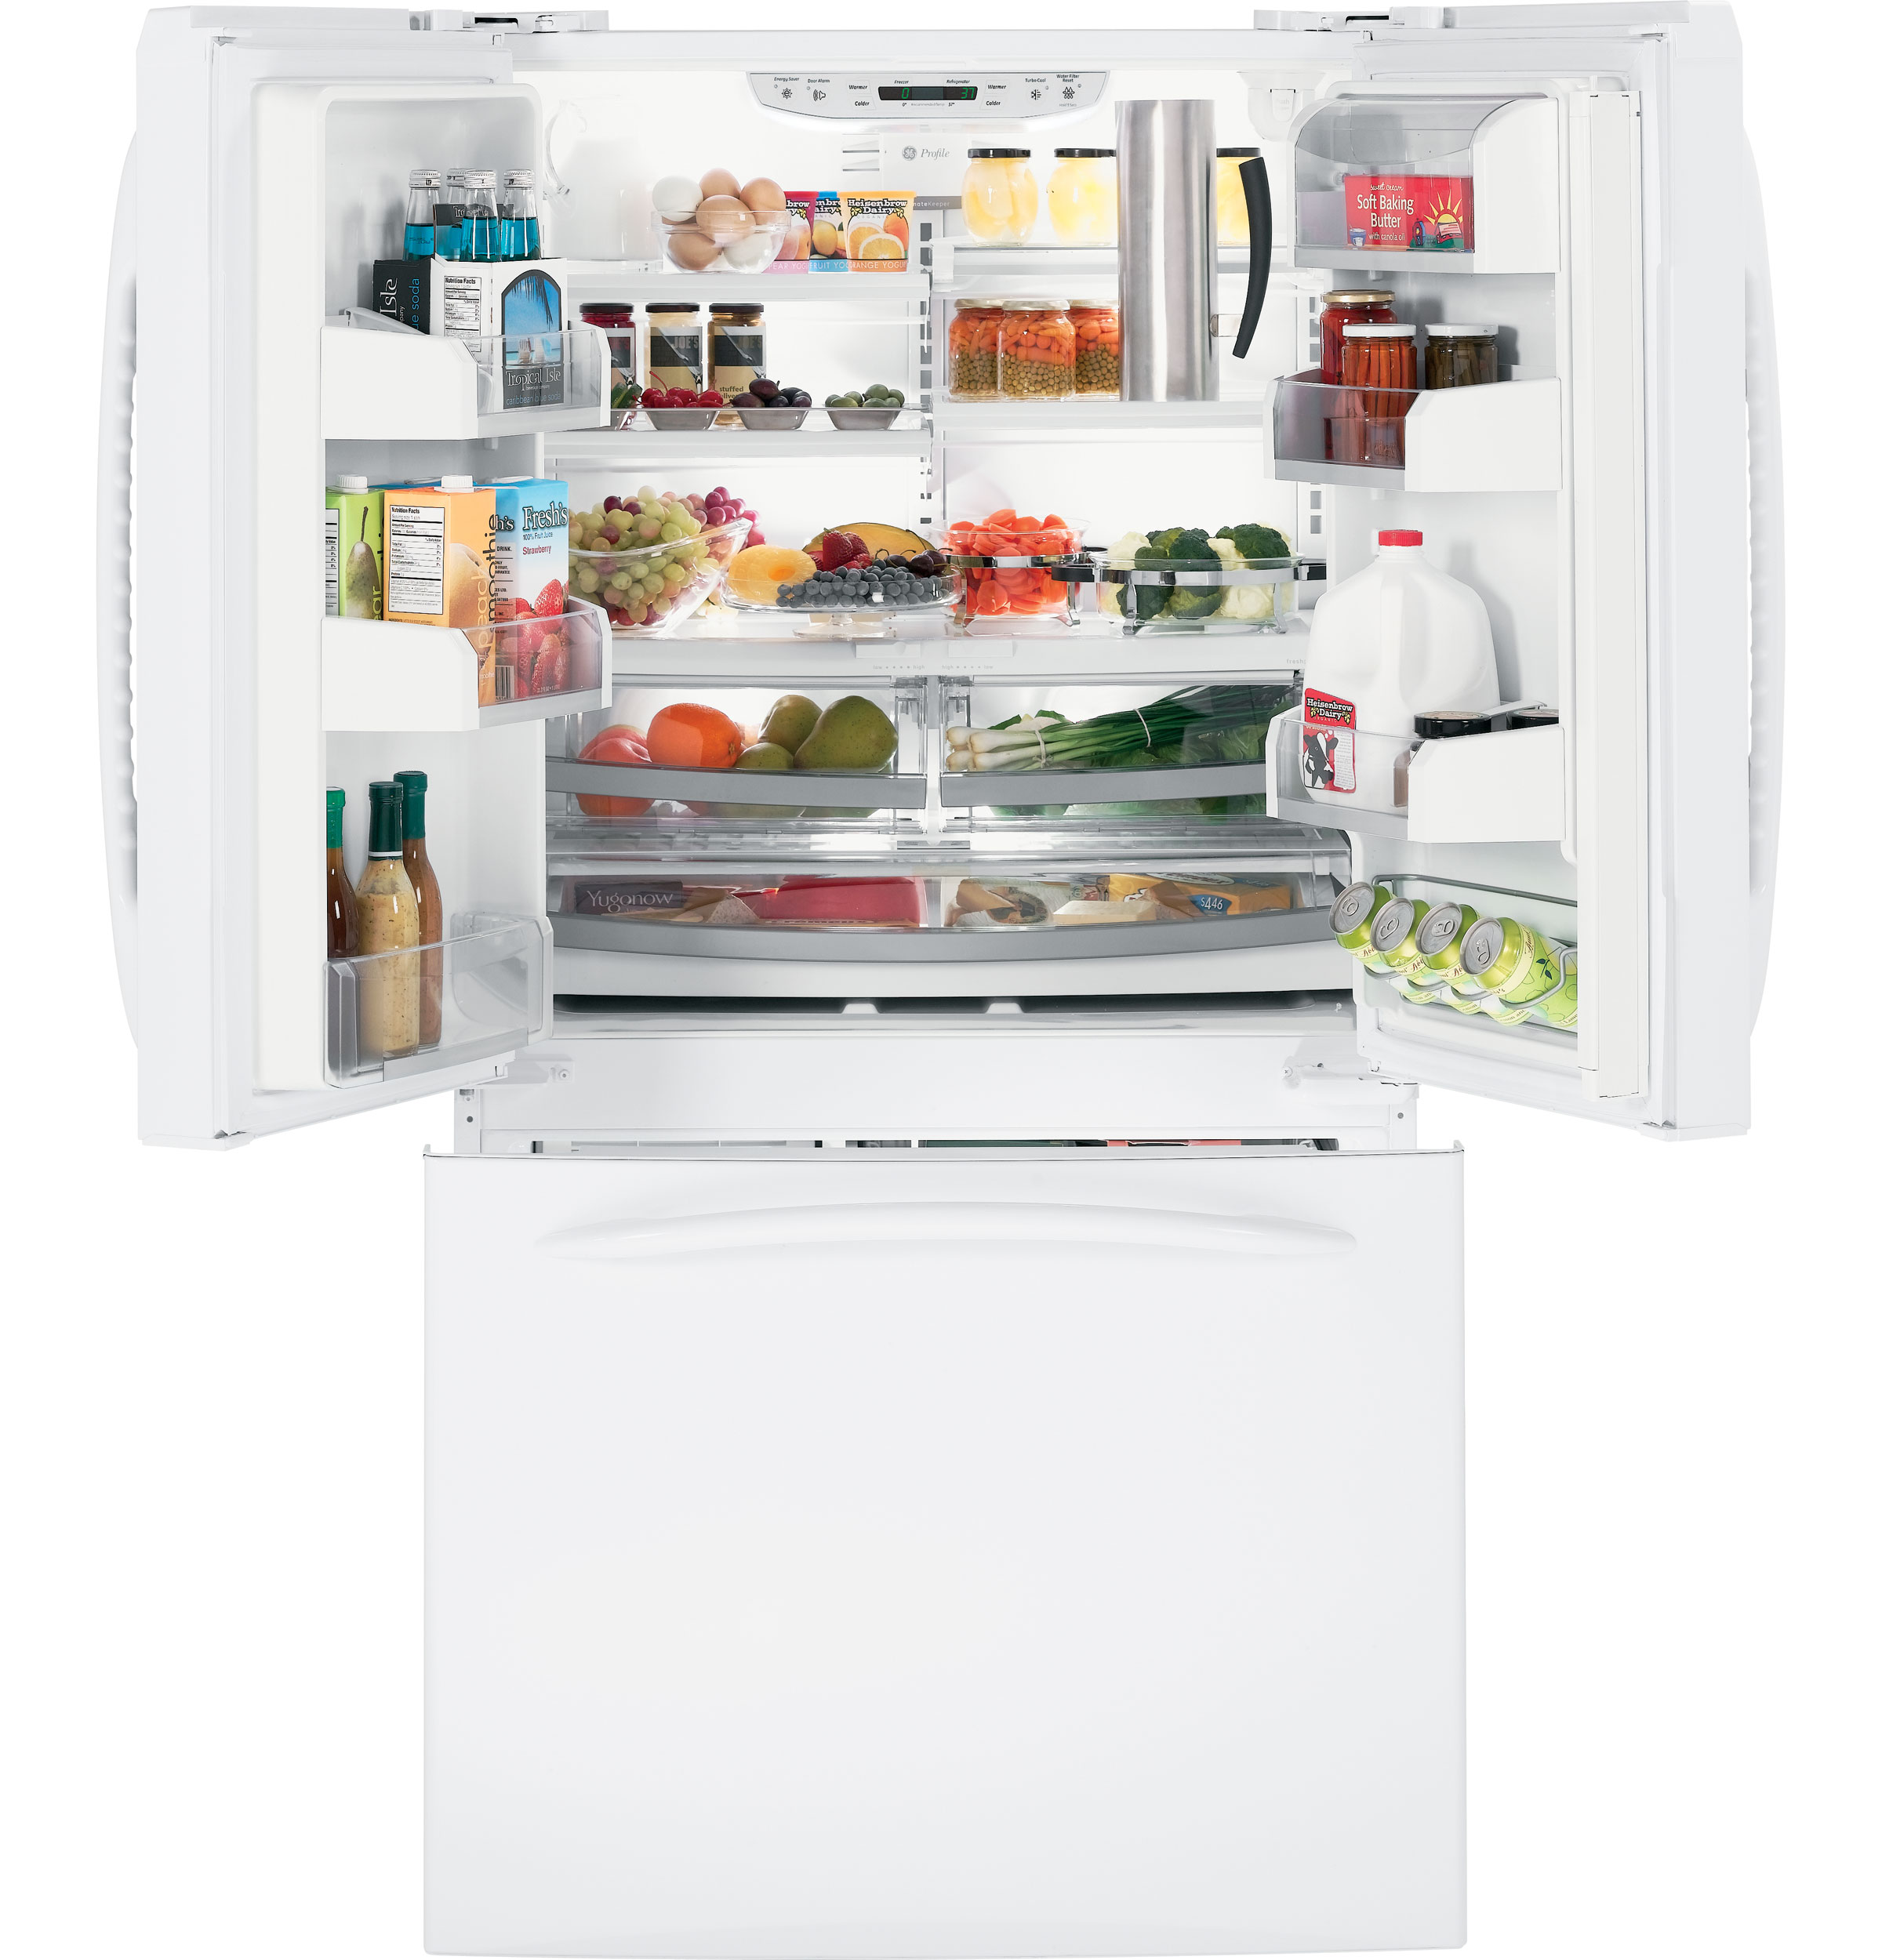 GE Profile™ ENERGY STAR® 20.8 Cu. Ft. French-Door Refrigerator with Icemaker